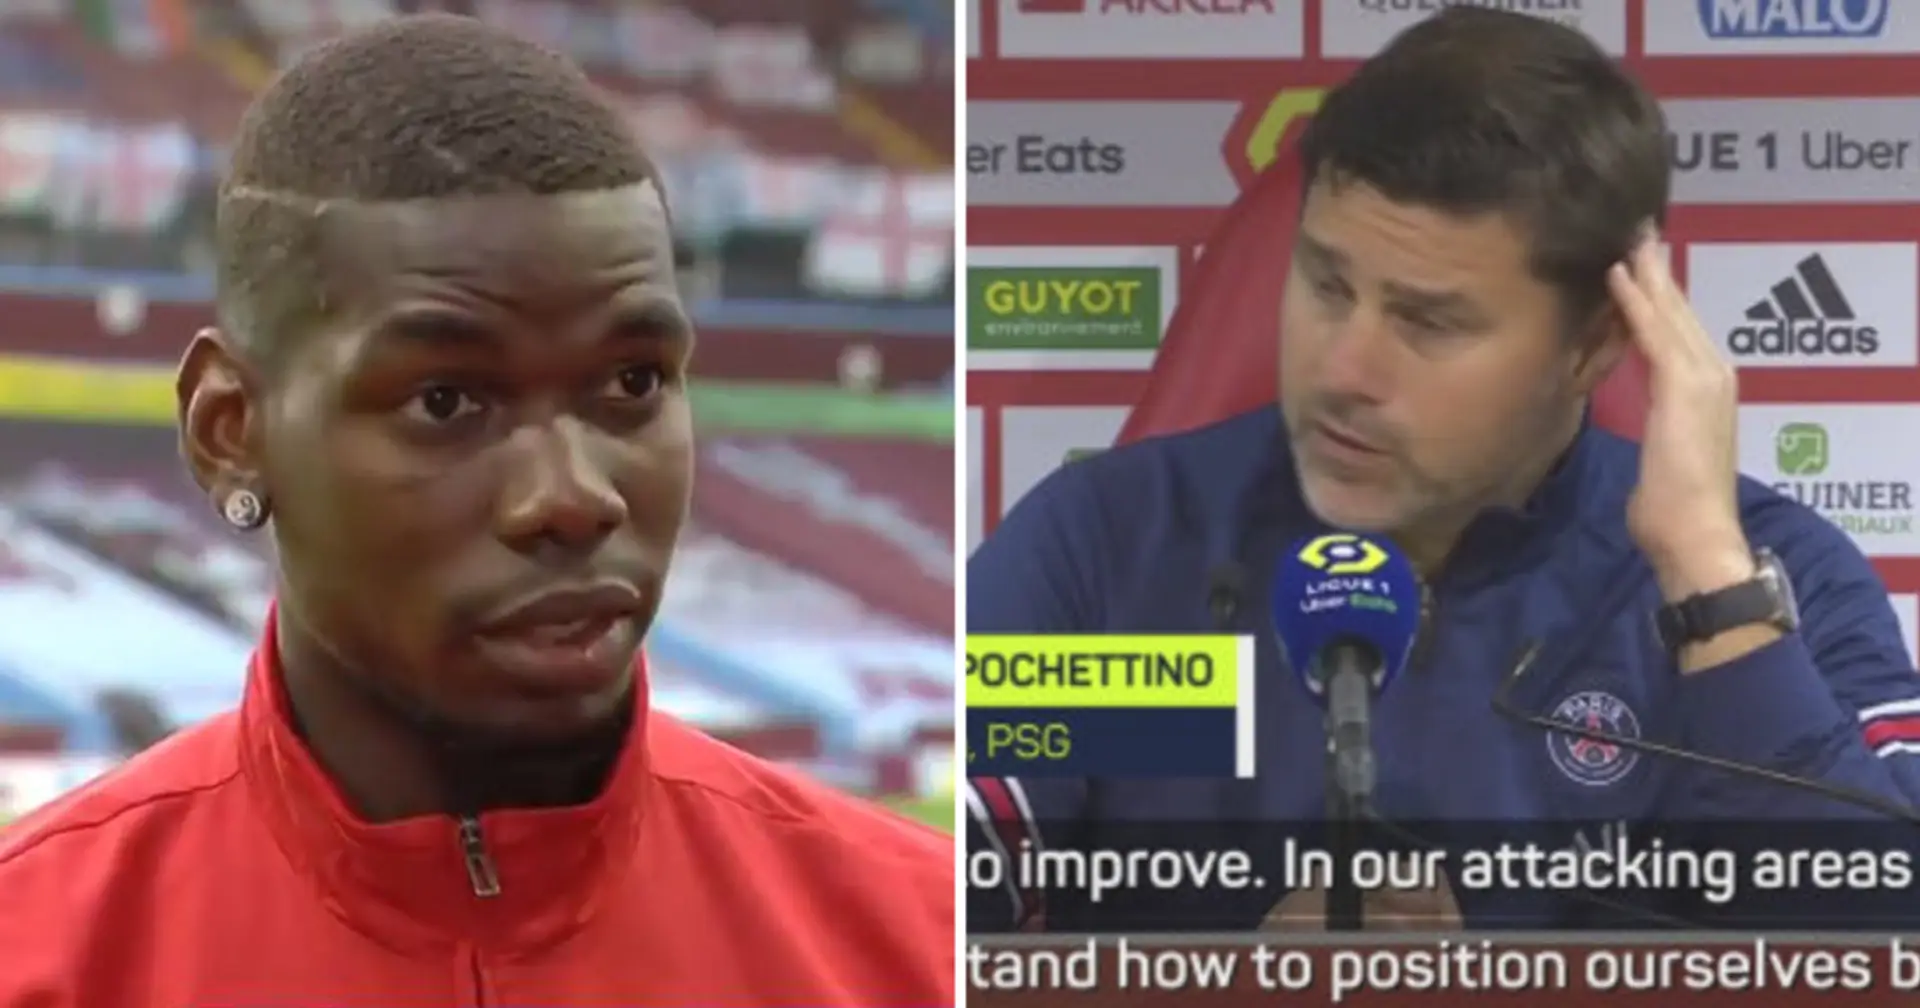 'We're always open to improving our workforce': Pochettino on potential Pogba move